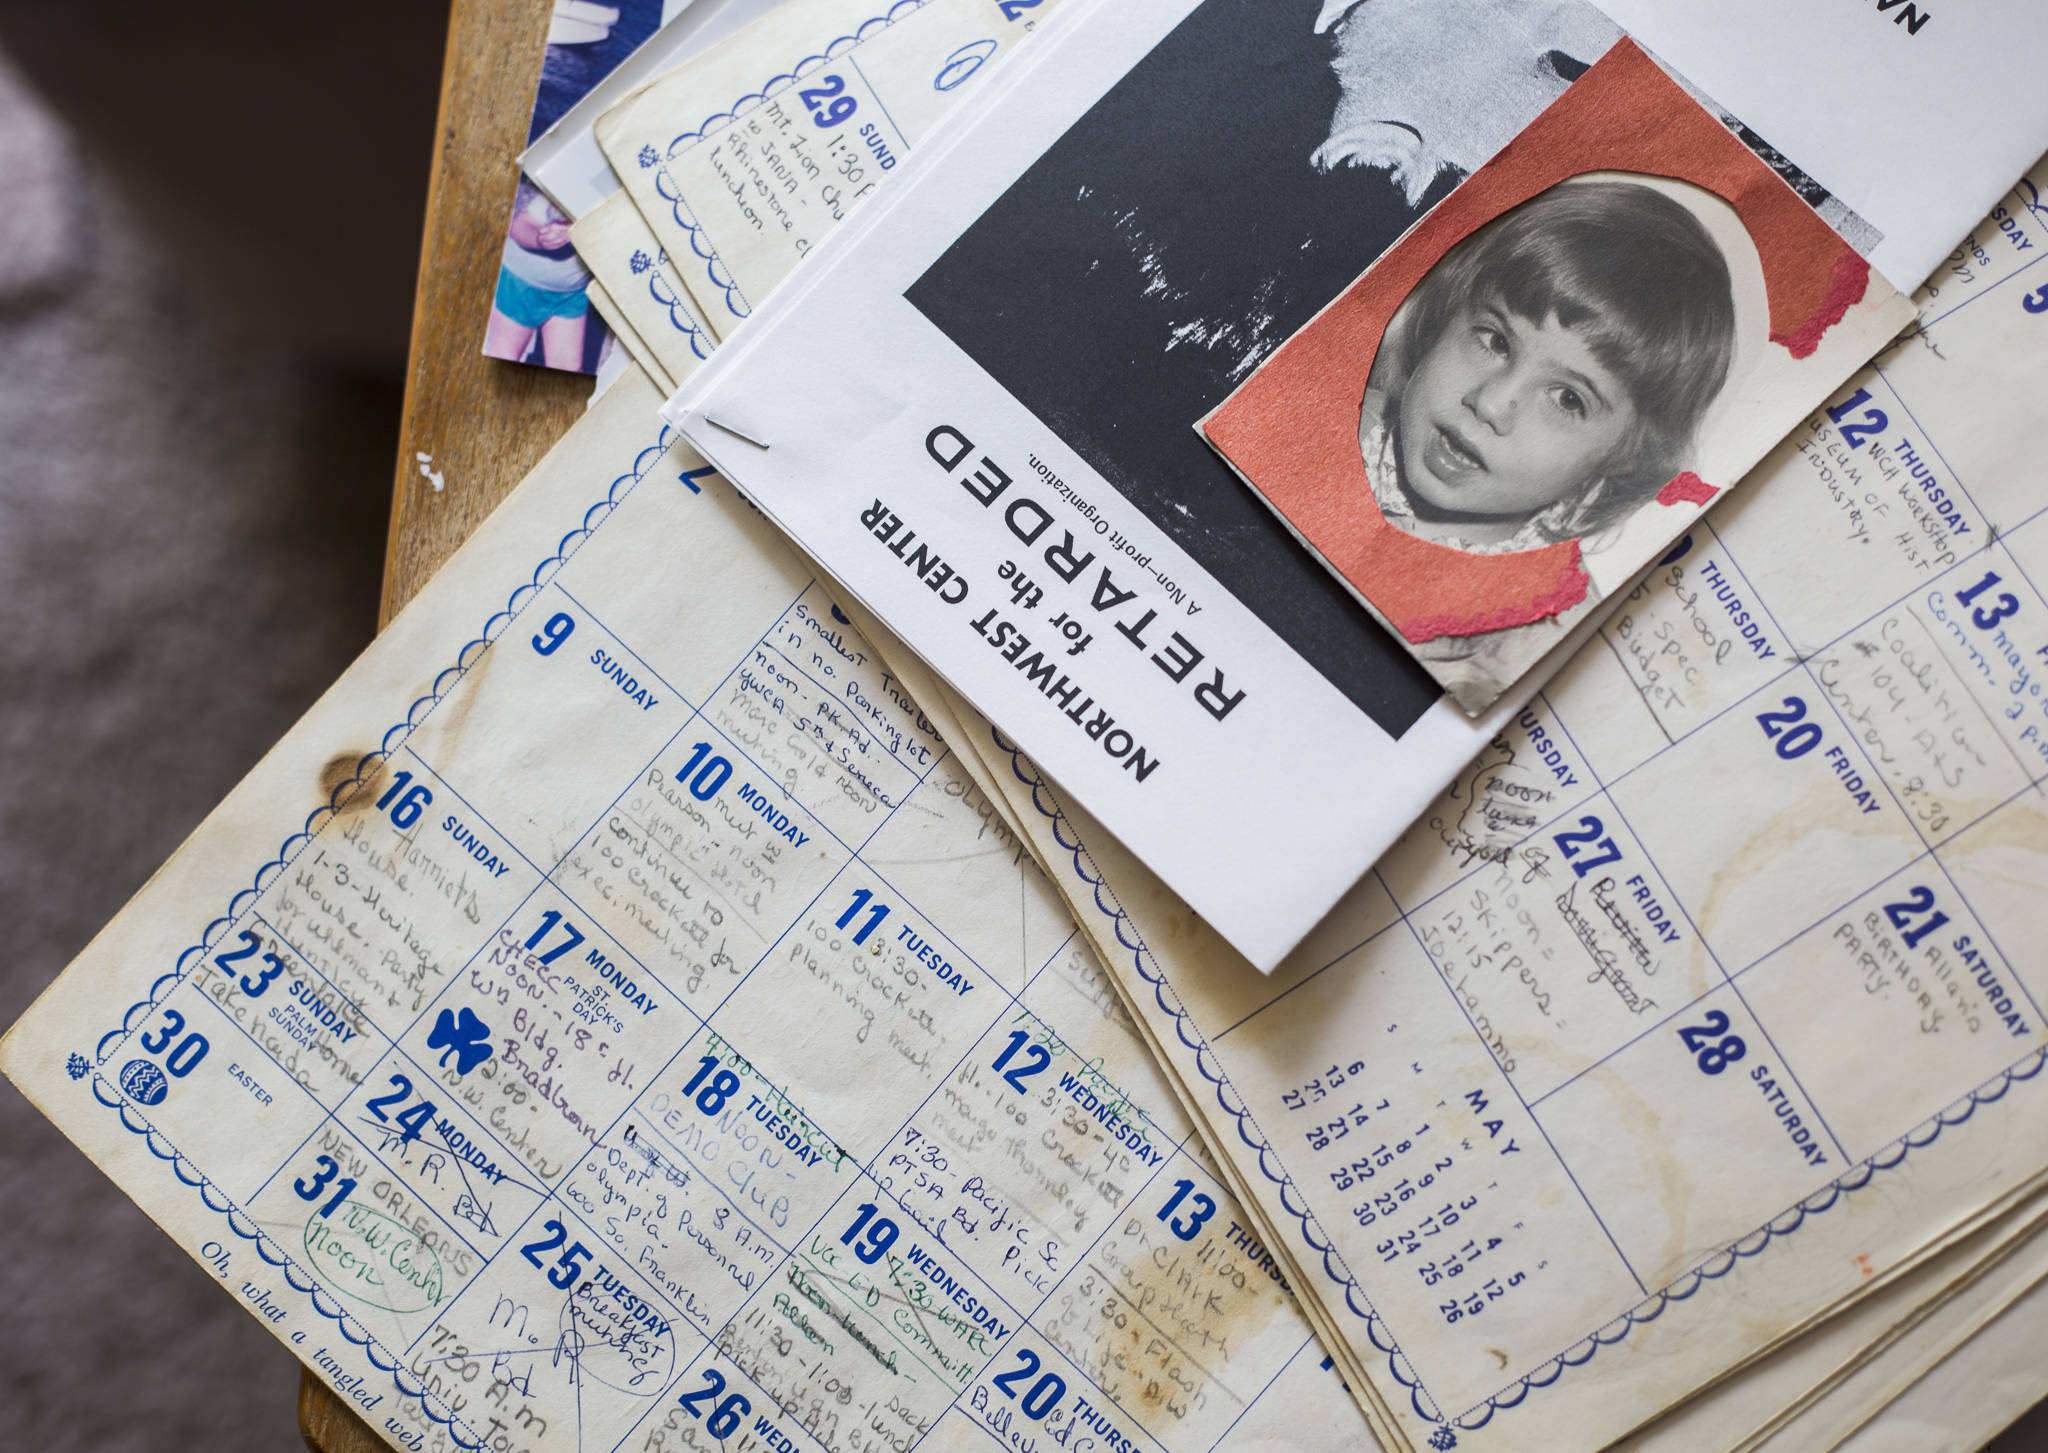 A photograph of Janet Taggarts daughter, Naida, sits on top of her old calendars filled with appointments and notes in her home. (Olivia Vanni / The Herald)